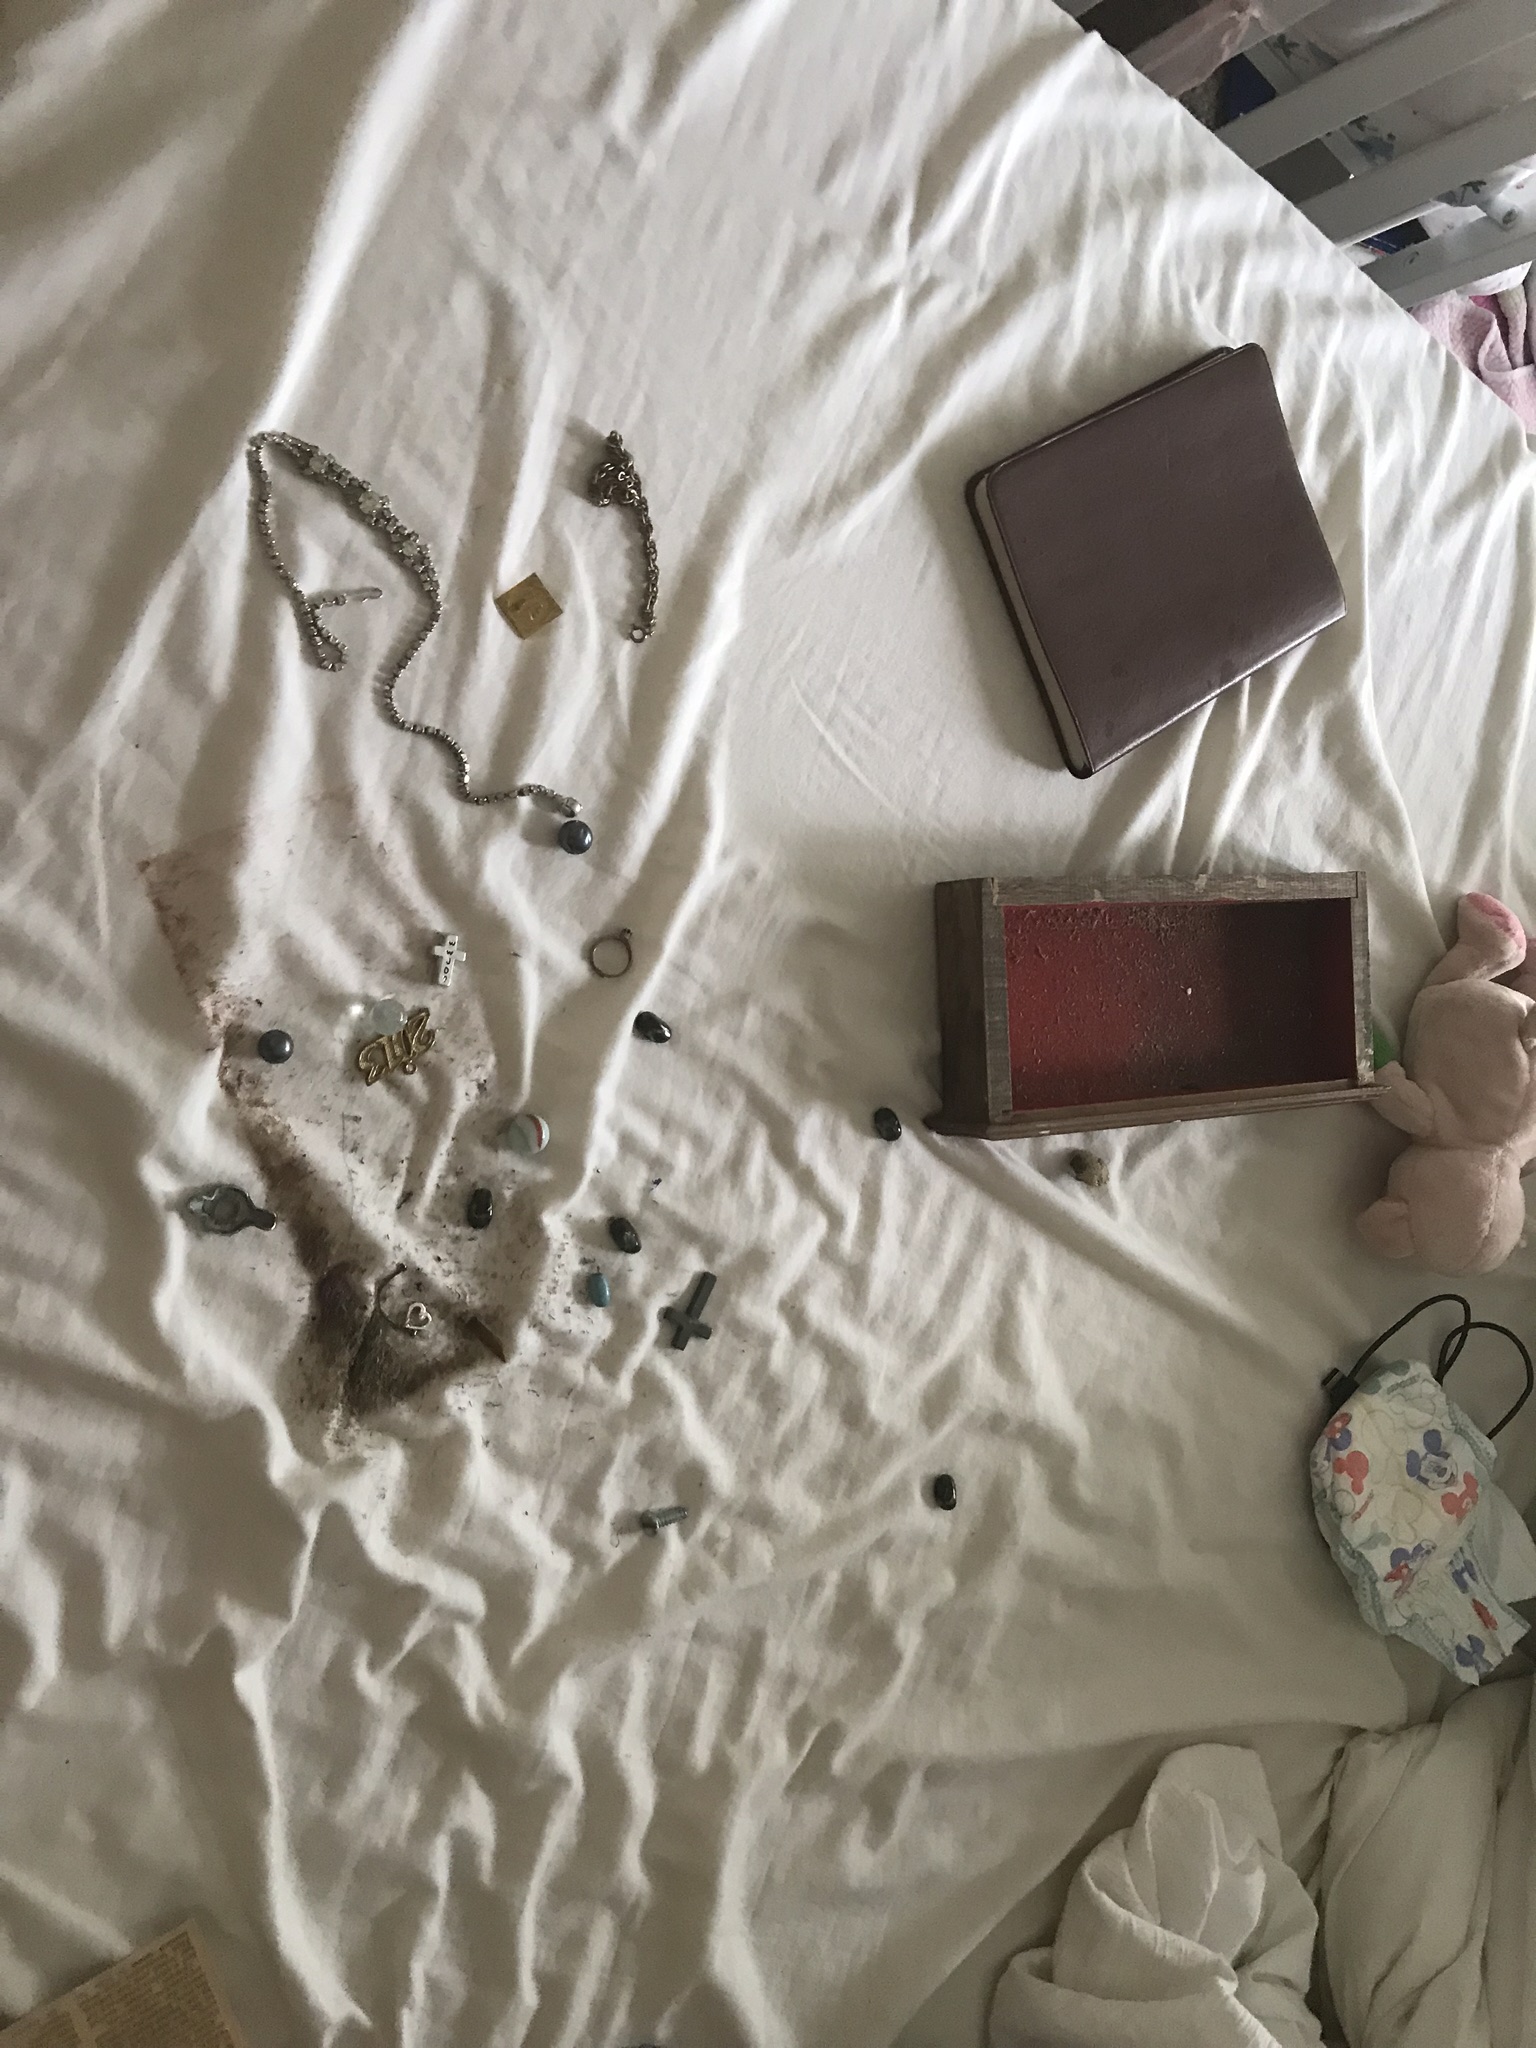 Jewelry and valuable stolen by AH4R neighbor claim